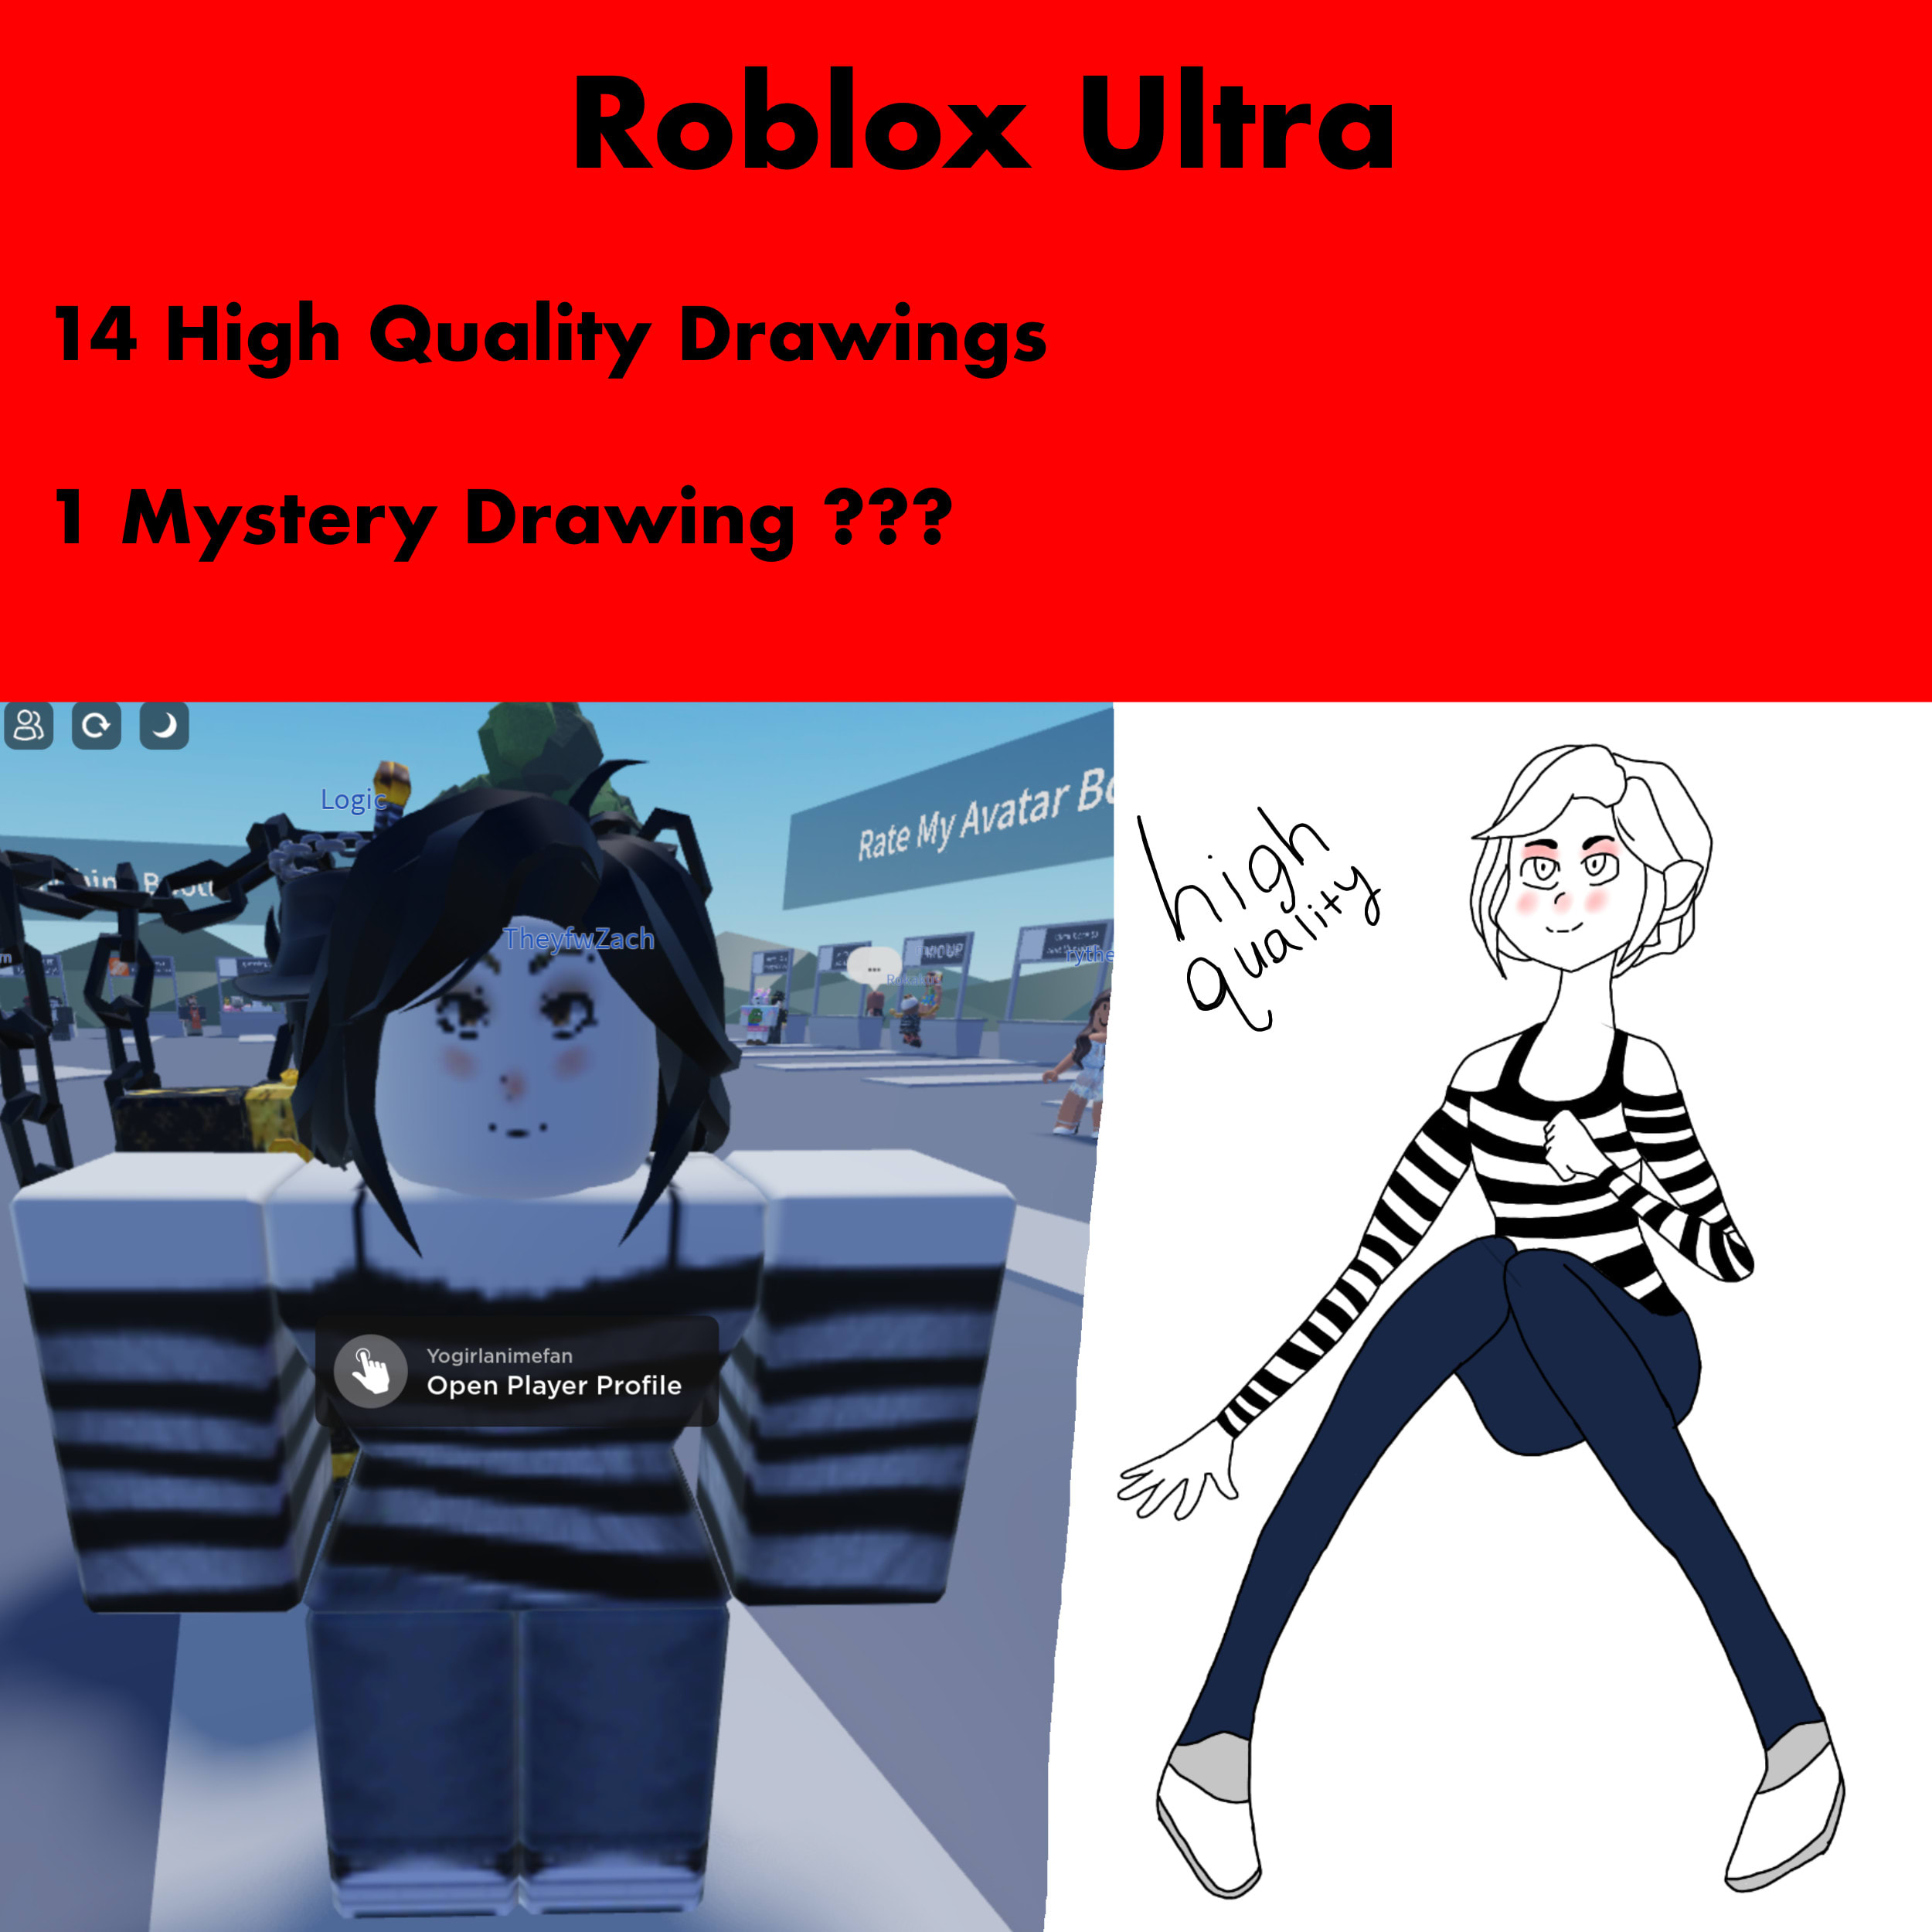 LS O- 179 Q Search SALE Home Popular SUBMIT A ROBLOX AVATAR, I WILL DRAW THE